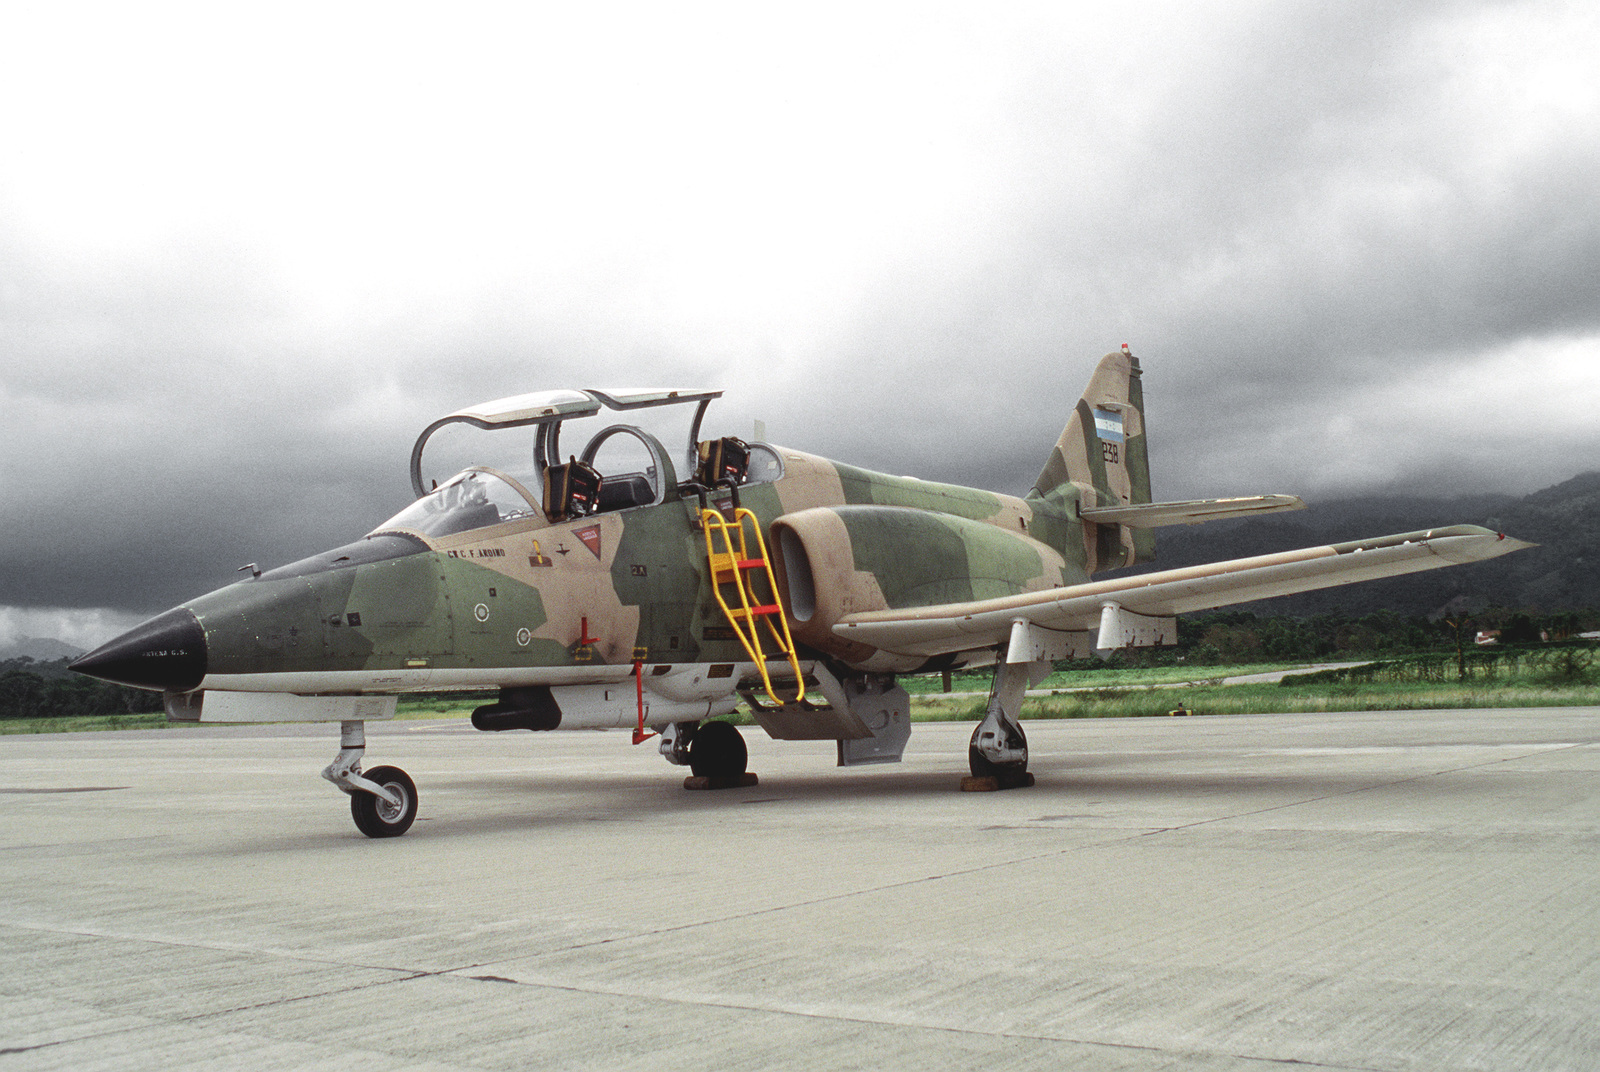 A C 101 Aviojet Aircraft Of The Honduran Air Force Sits On The Flight Line With